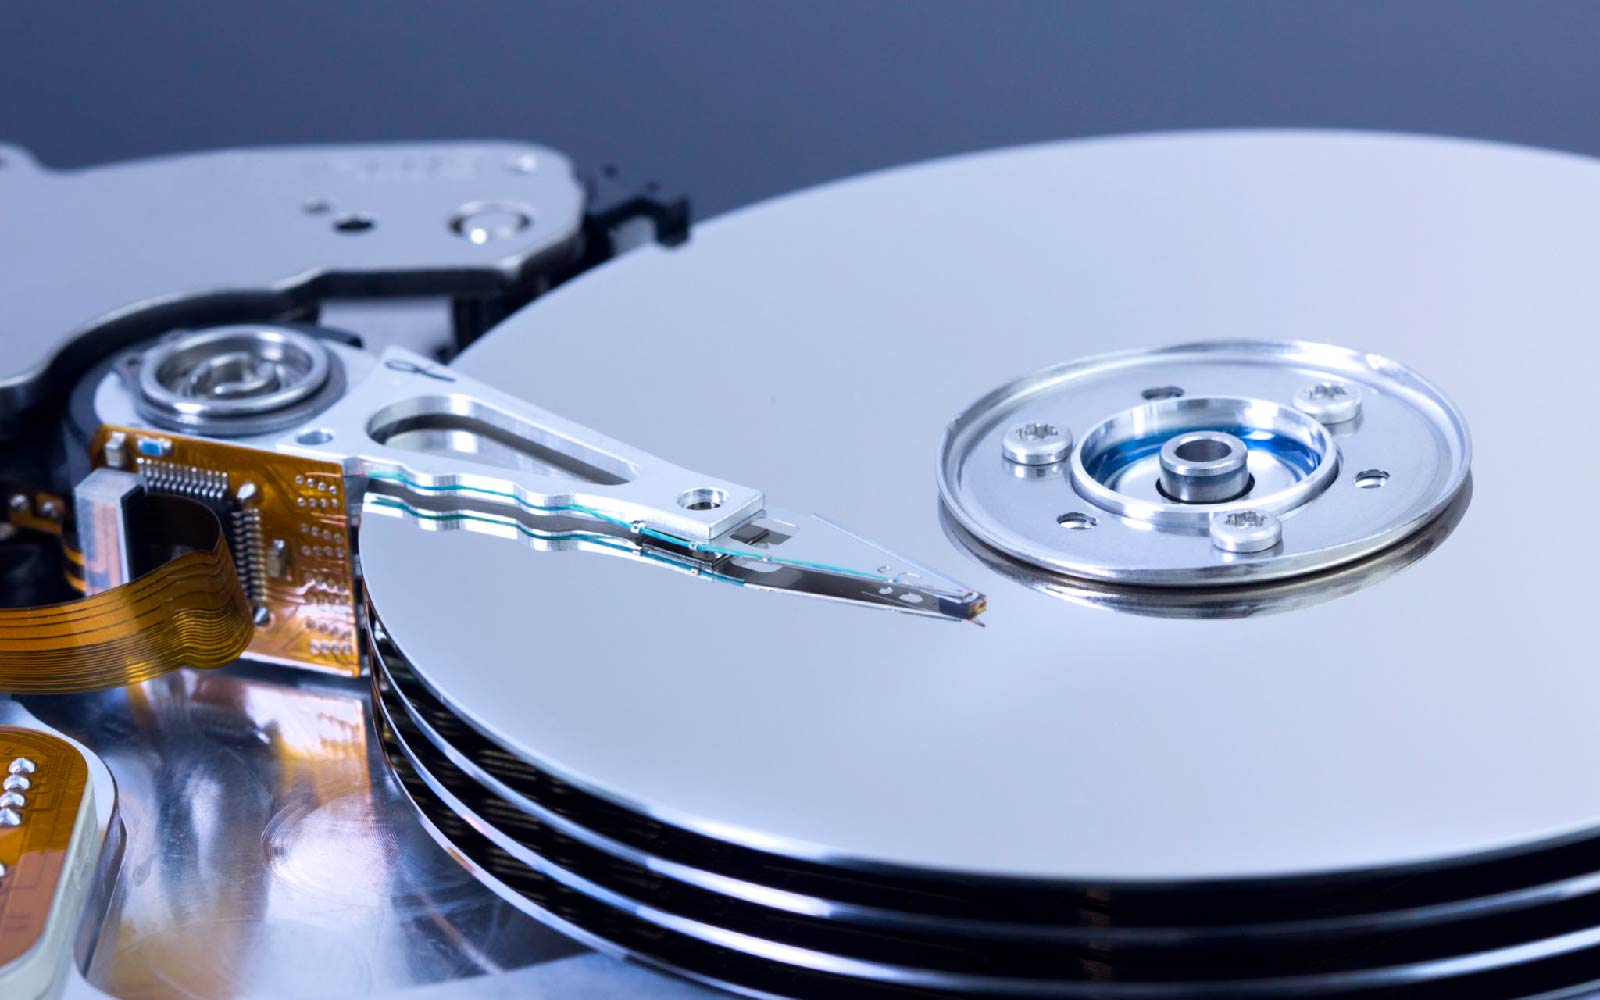 How To Repair A Laptop Without A Windows Installation Disc